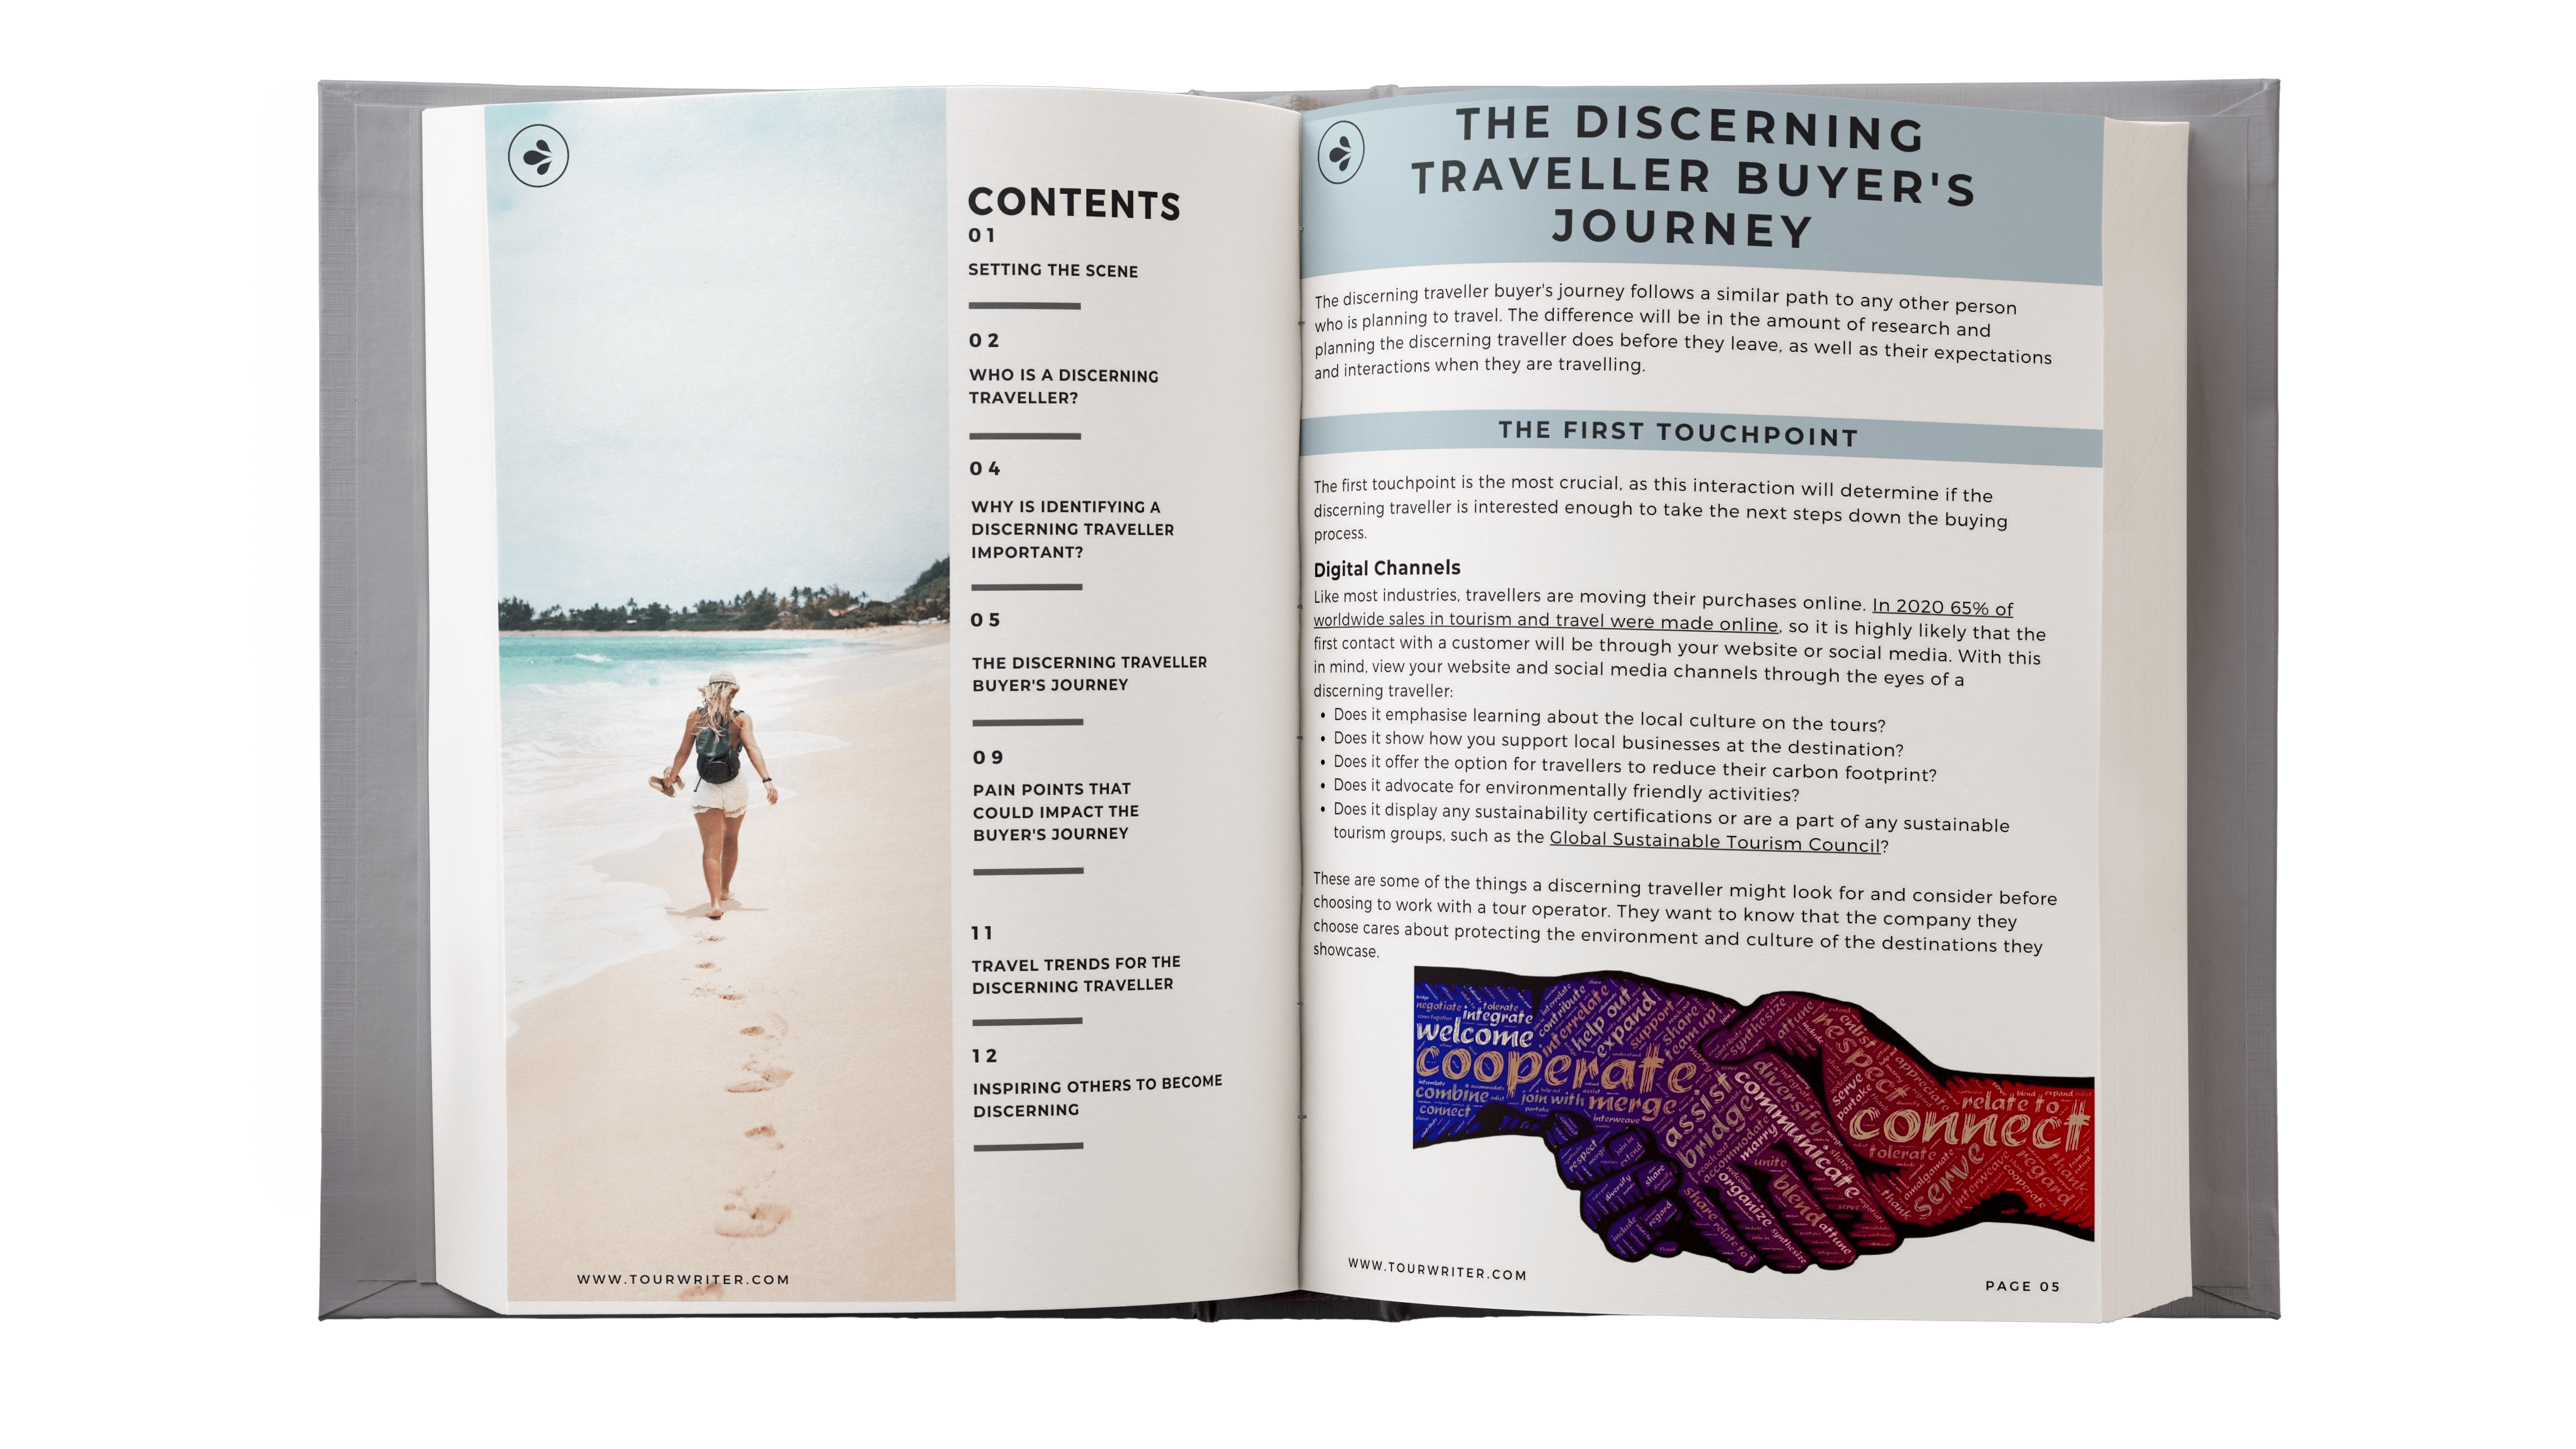 Tour operators guide to discerning traveller ebook